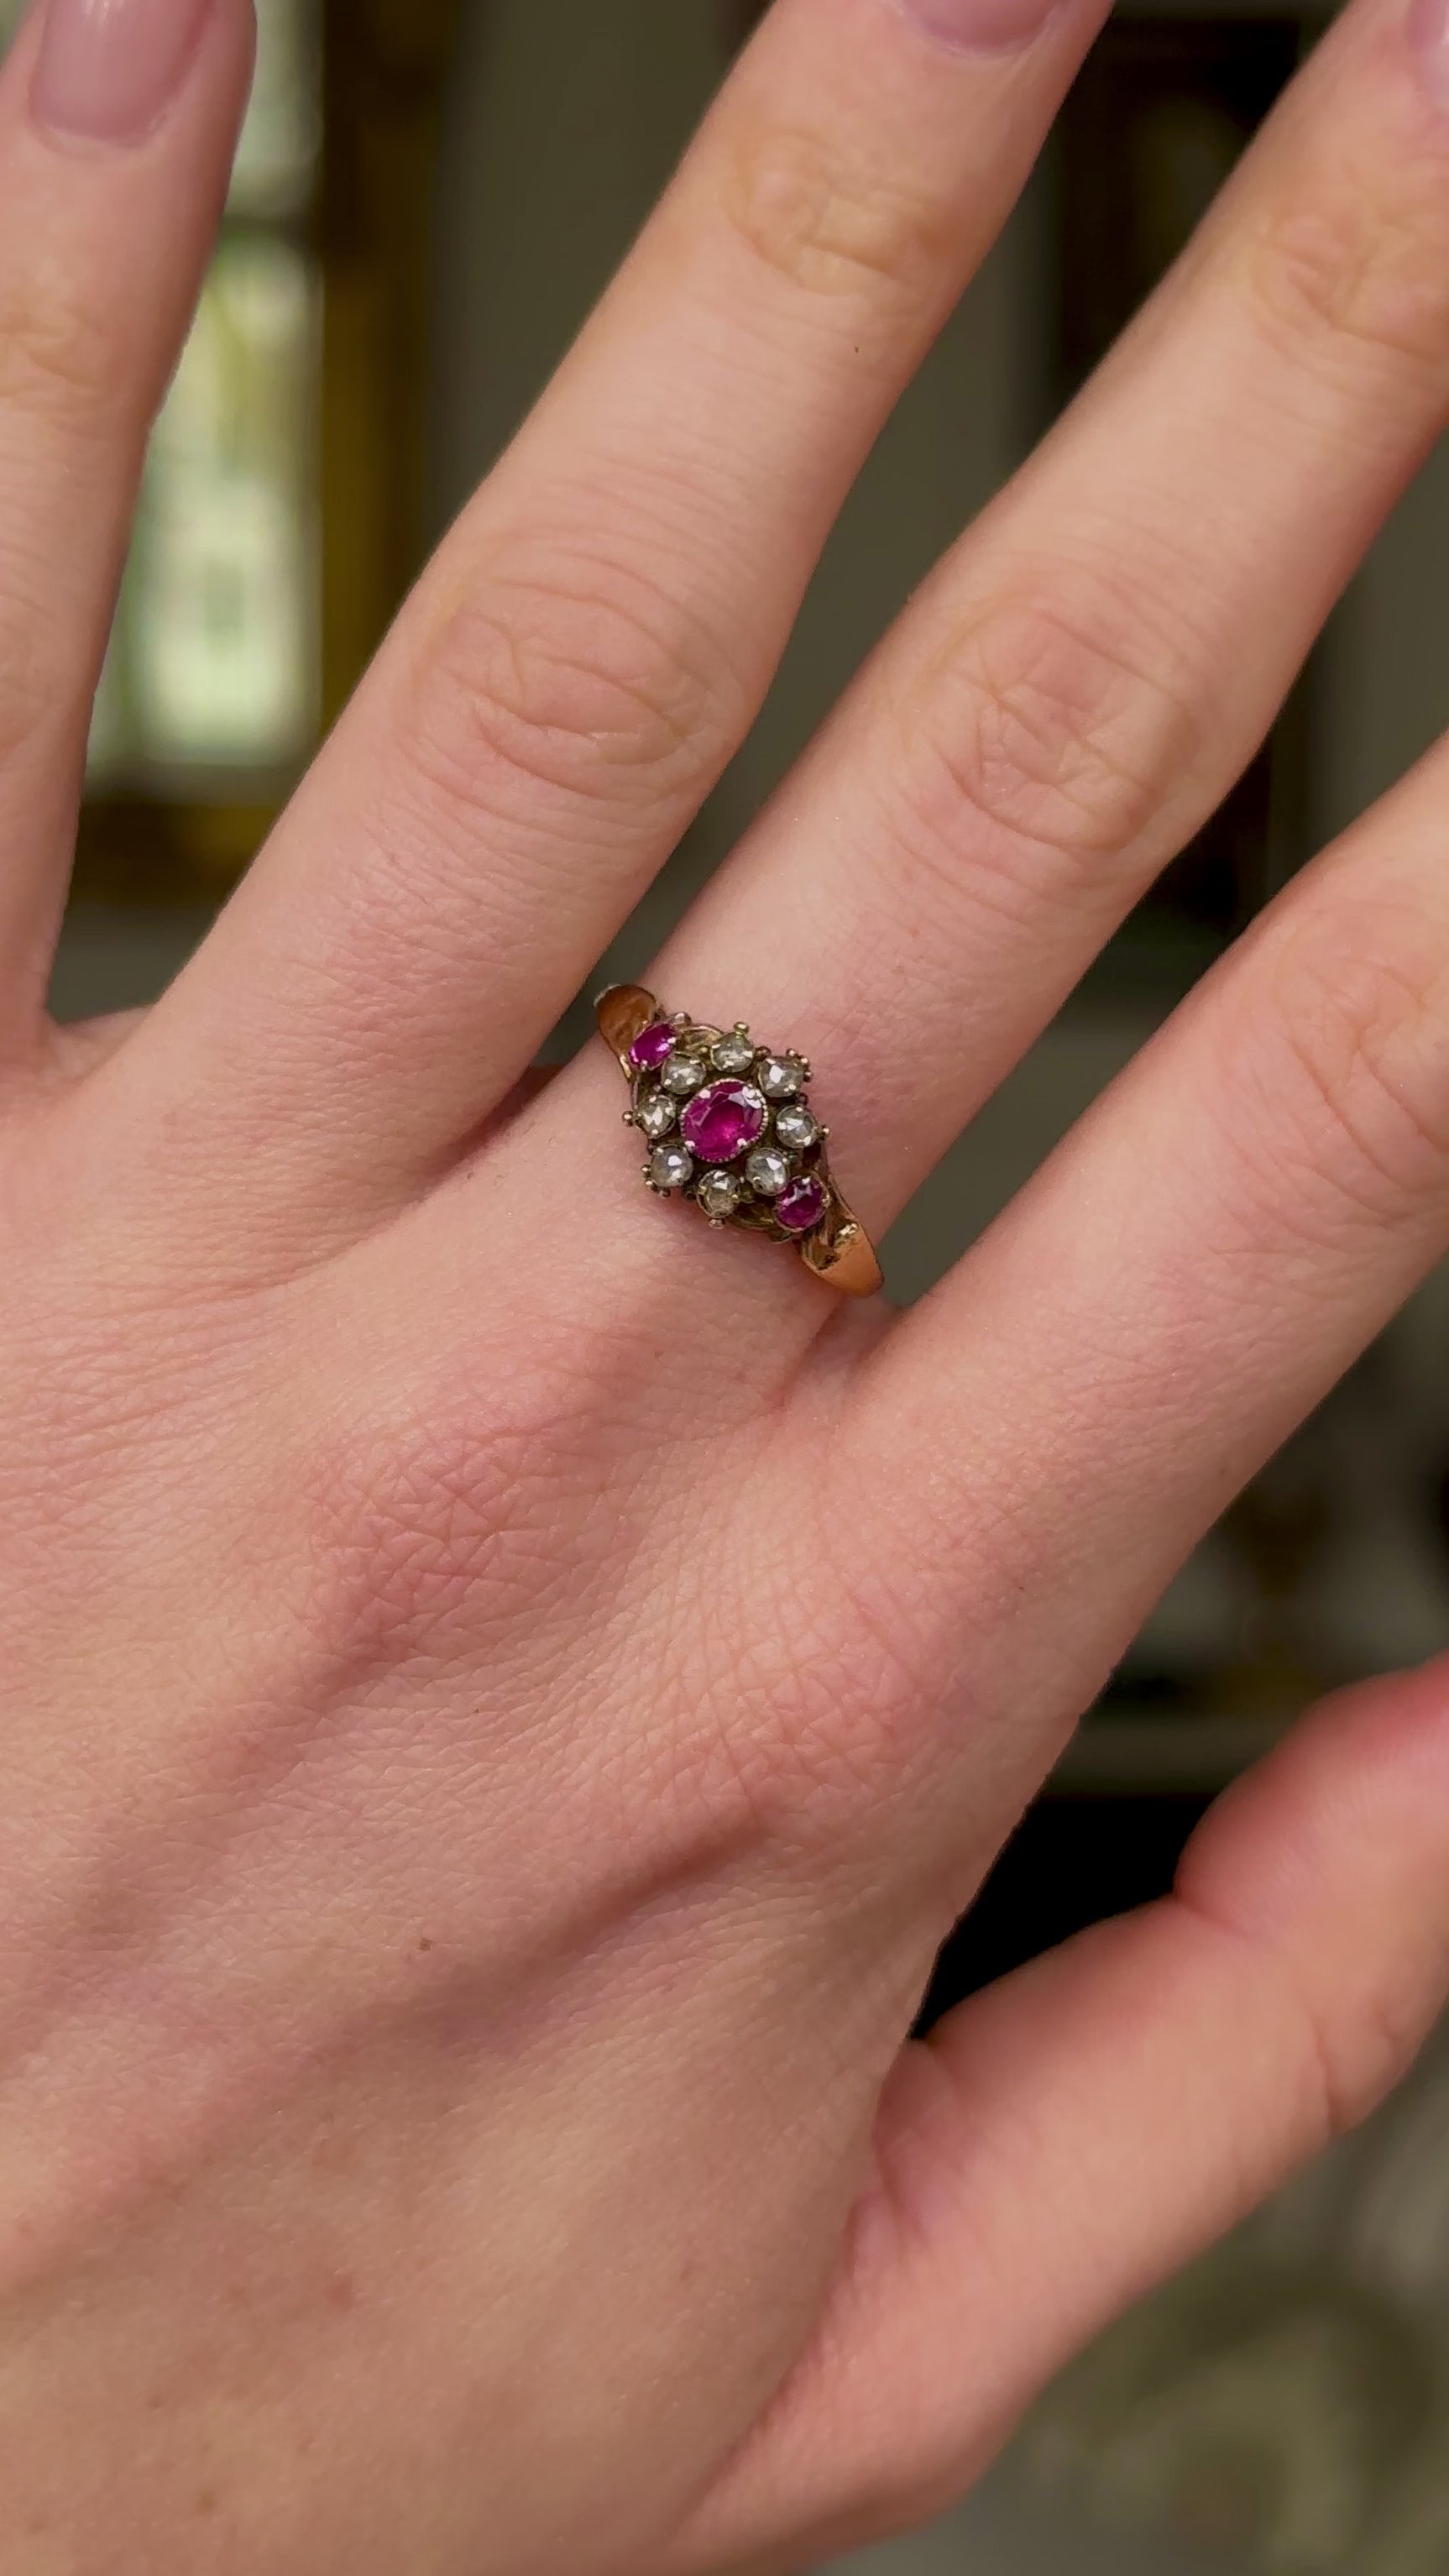 Antique, Edwardian Ruby and Diamond Cluster Ring, worn on hand and rotated to give perspective.